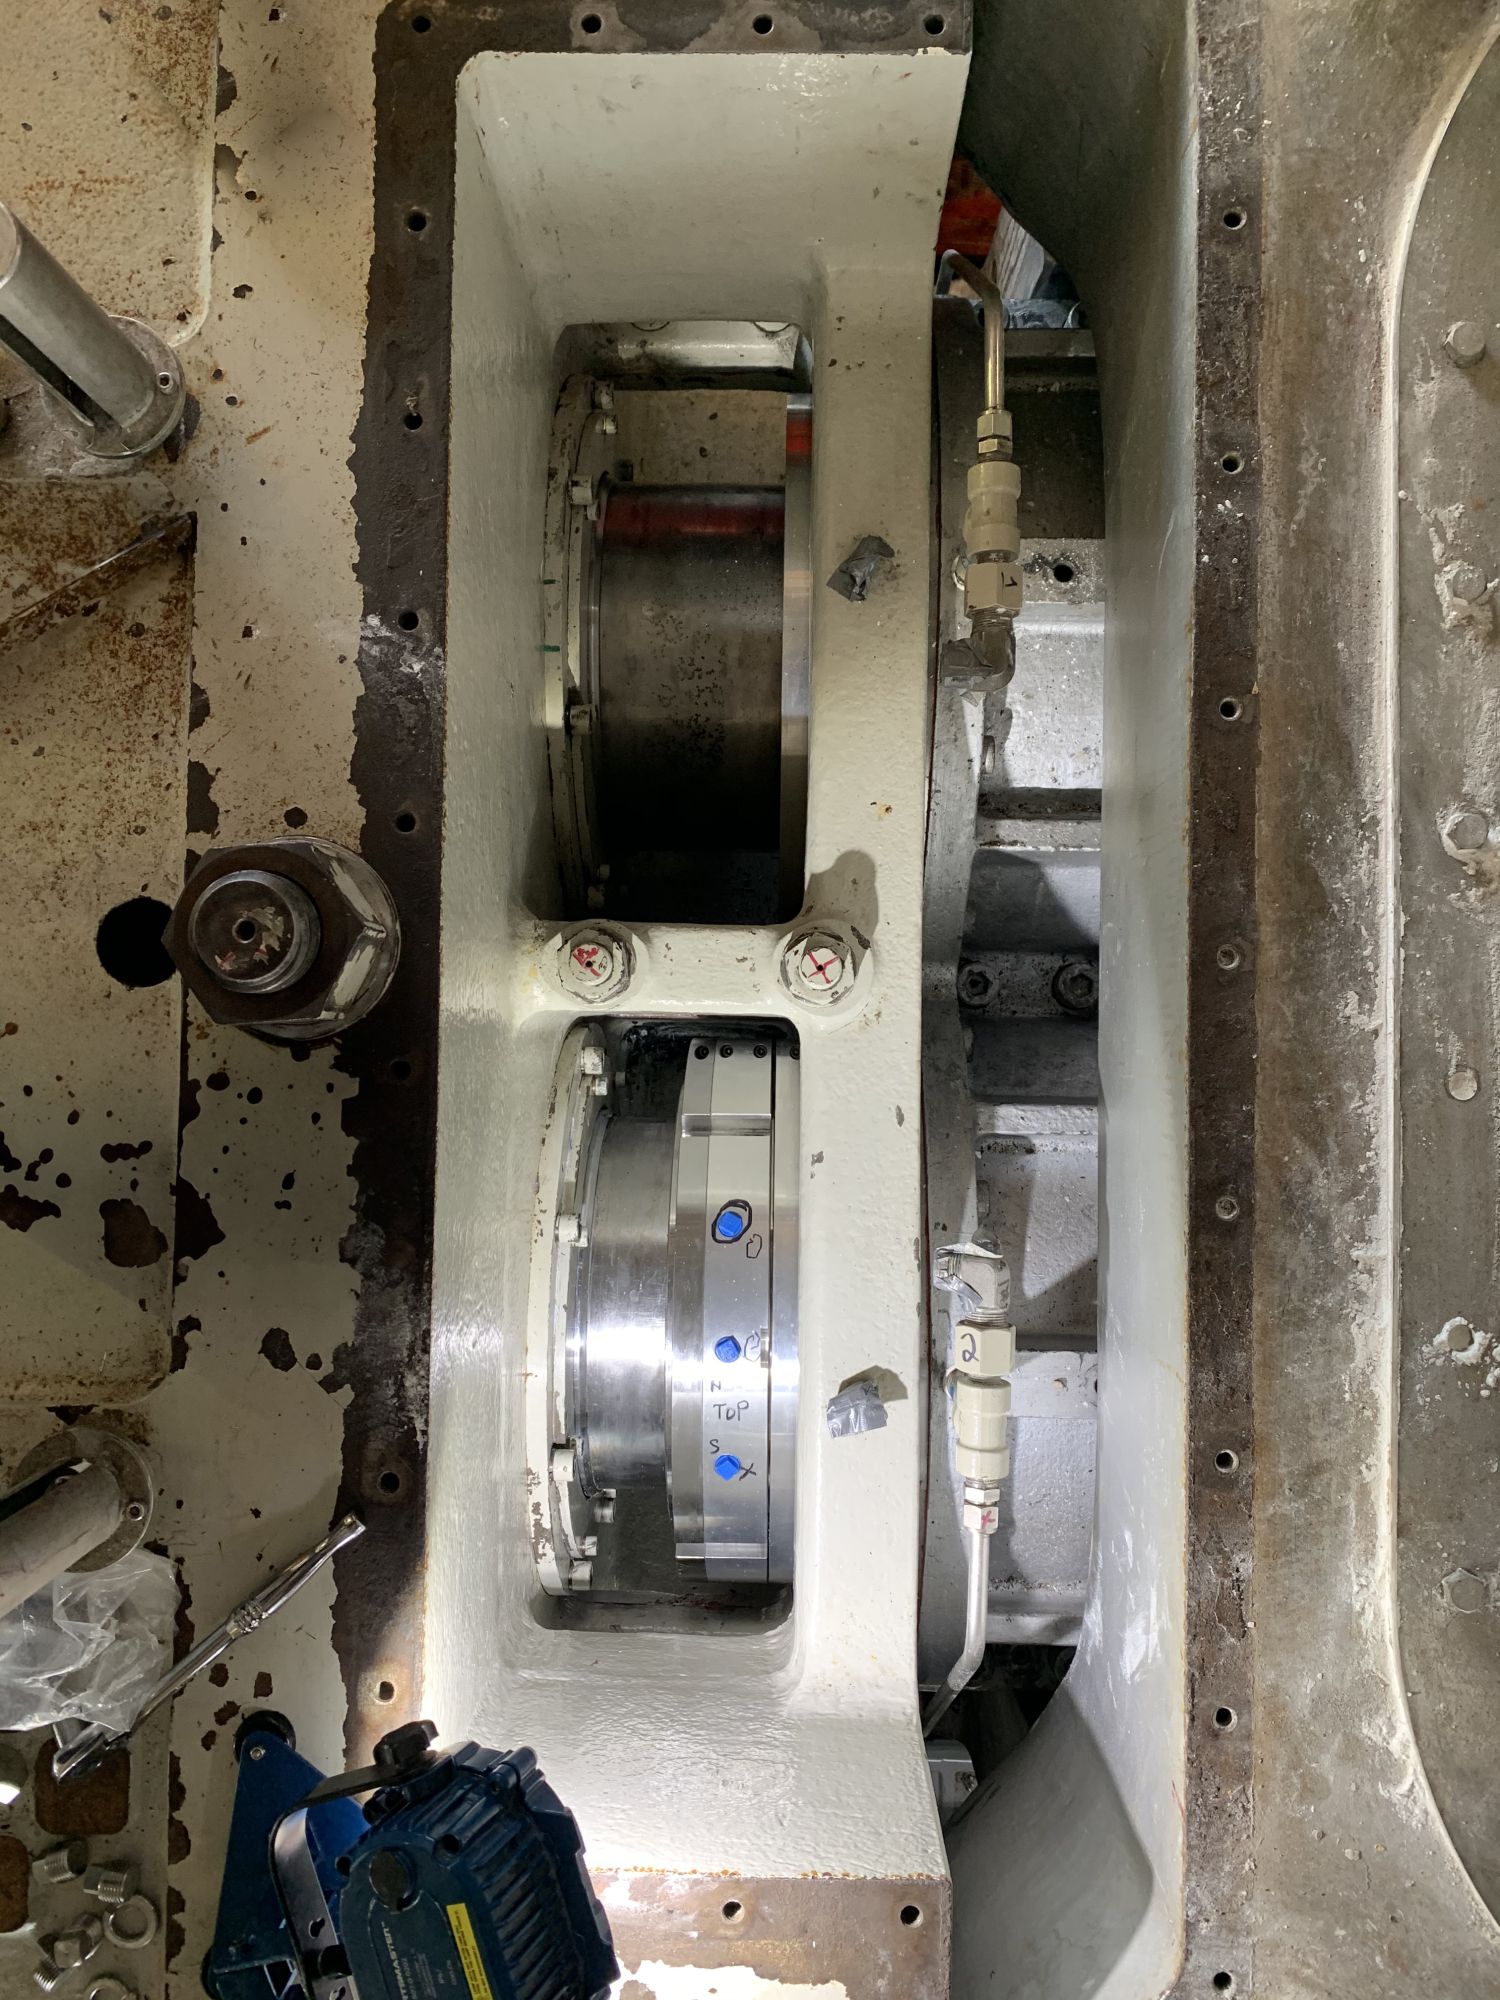 IMAGE 1: Installing the first of two side-by-side shaft seals on a twin shaft extruder (Images courtesy of Inpro/Seal)